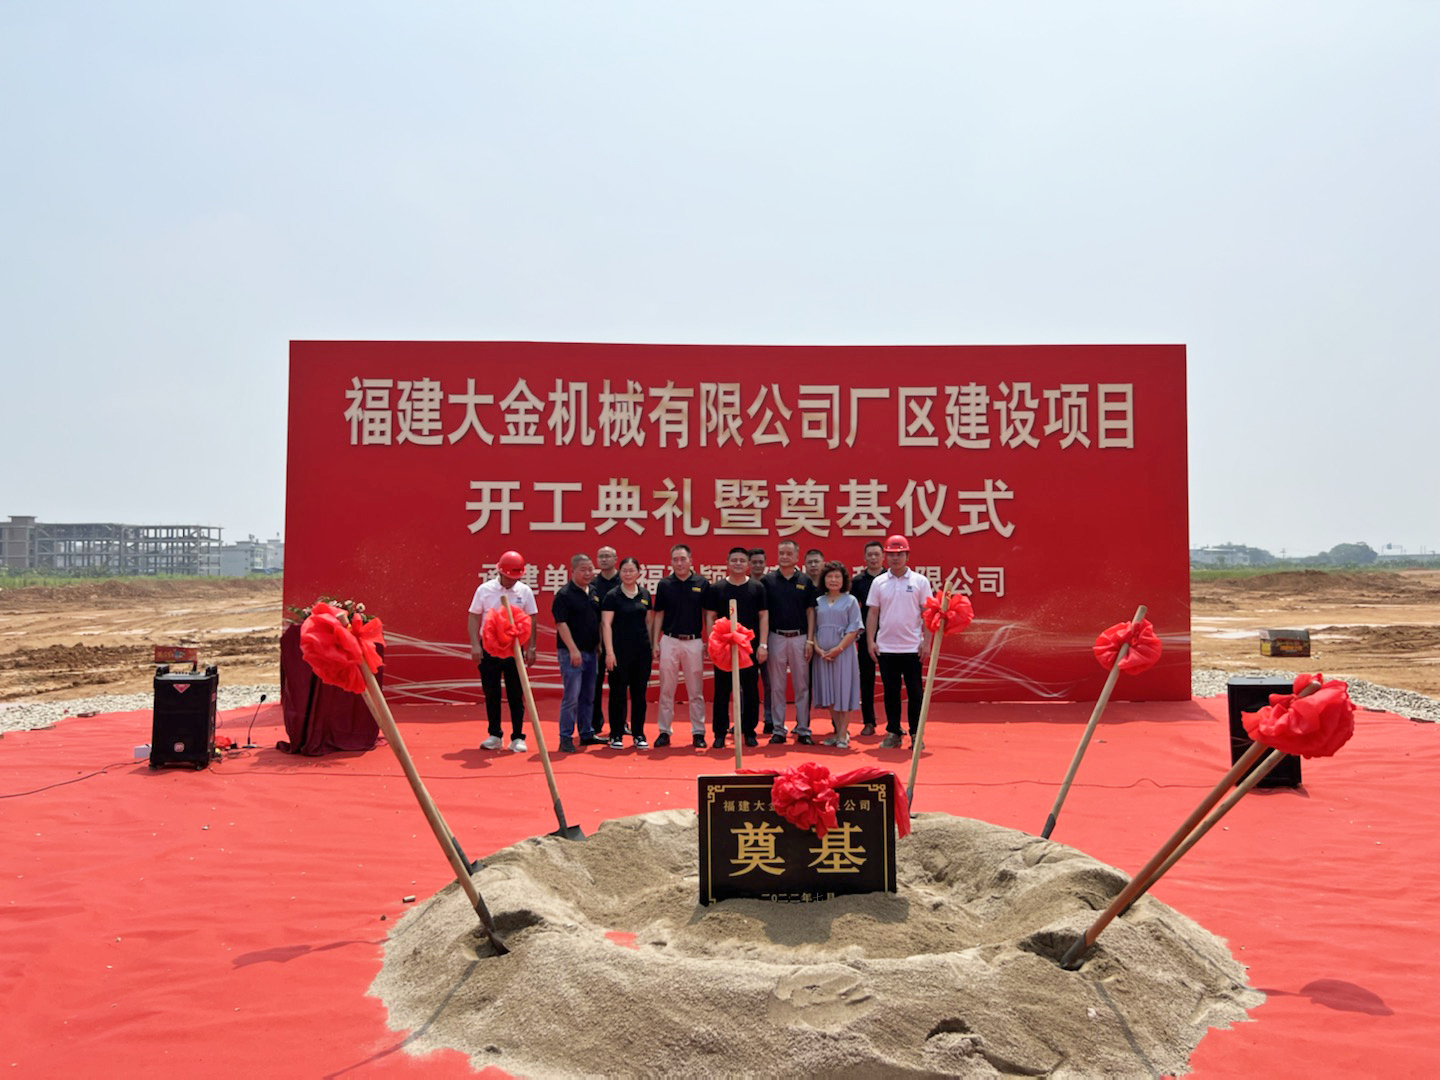 The groundbreaking ceremony and foundation laying ceremony of the factory construction project of Fujian Takam Machinery Co., Ltd. were held ceremoniously.